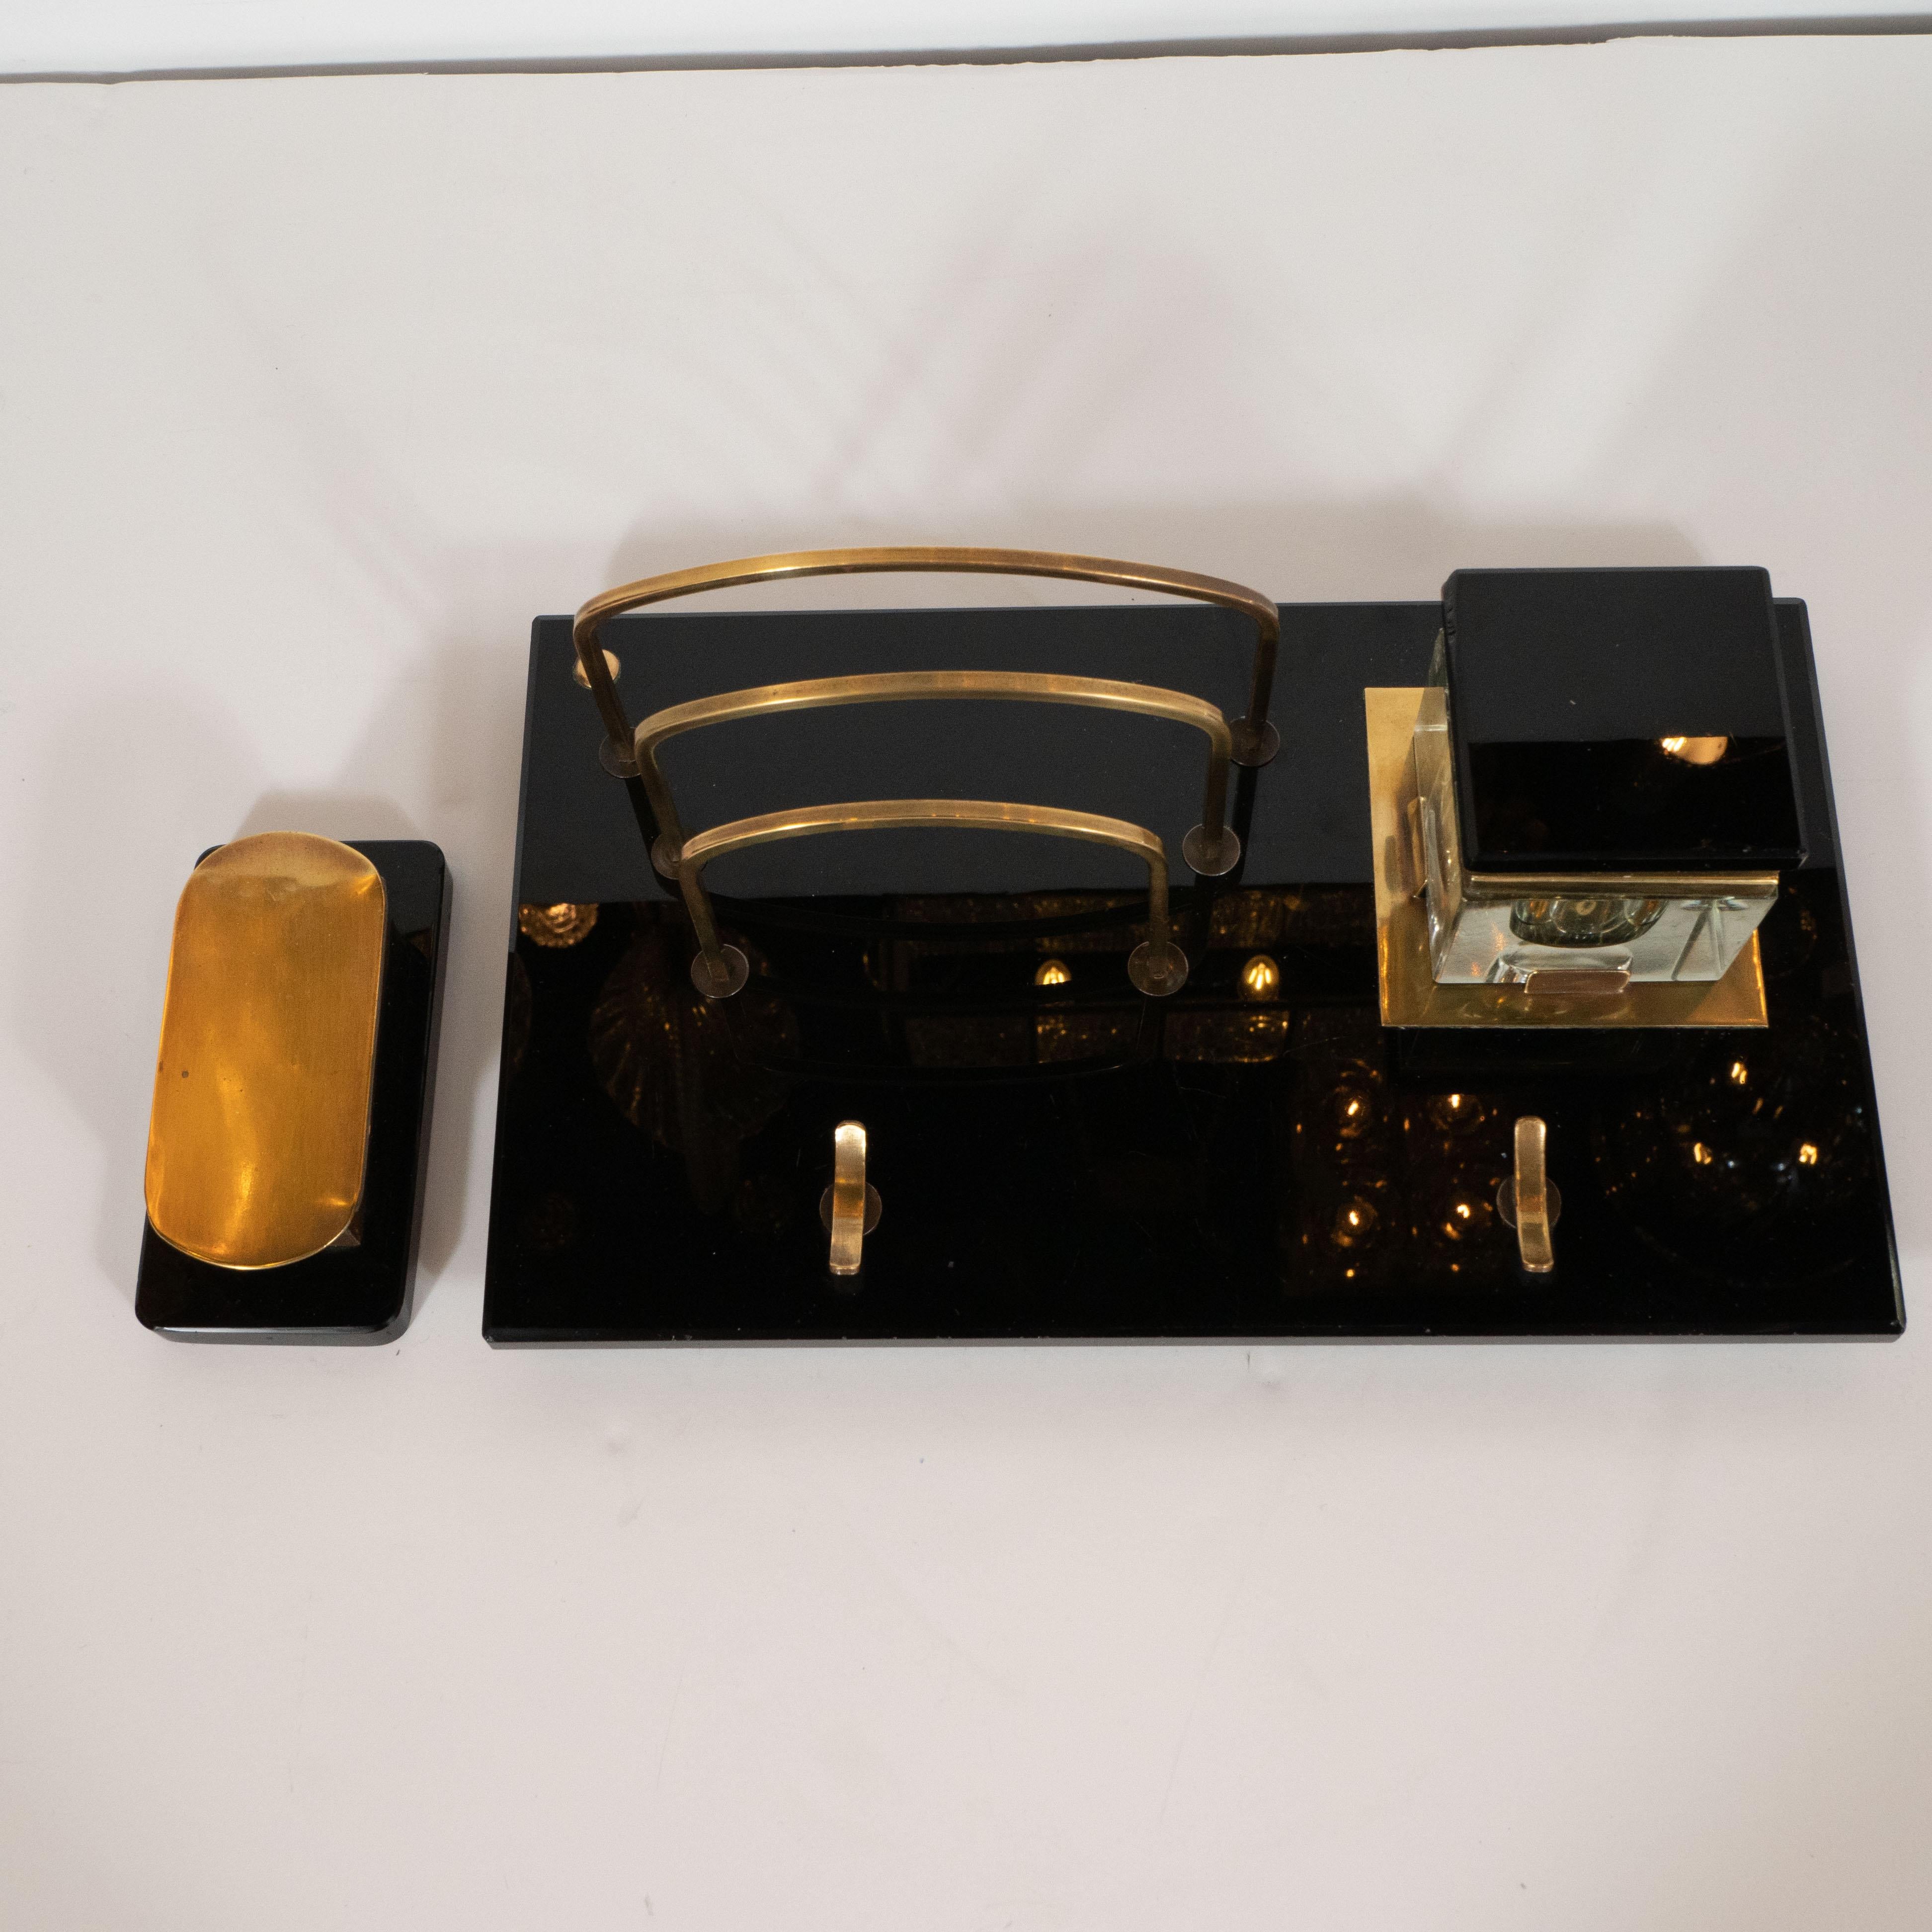 This American Art Deco desk set was produced, circa 1925. The set includes a pen rest, an inkwell, a letter holder and a stamp caddy. The letter holder, inkwell, and pen rest all sit on a lustrous black vitrolite plinth base with beveled edges. The